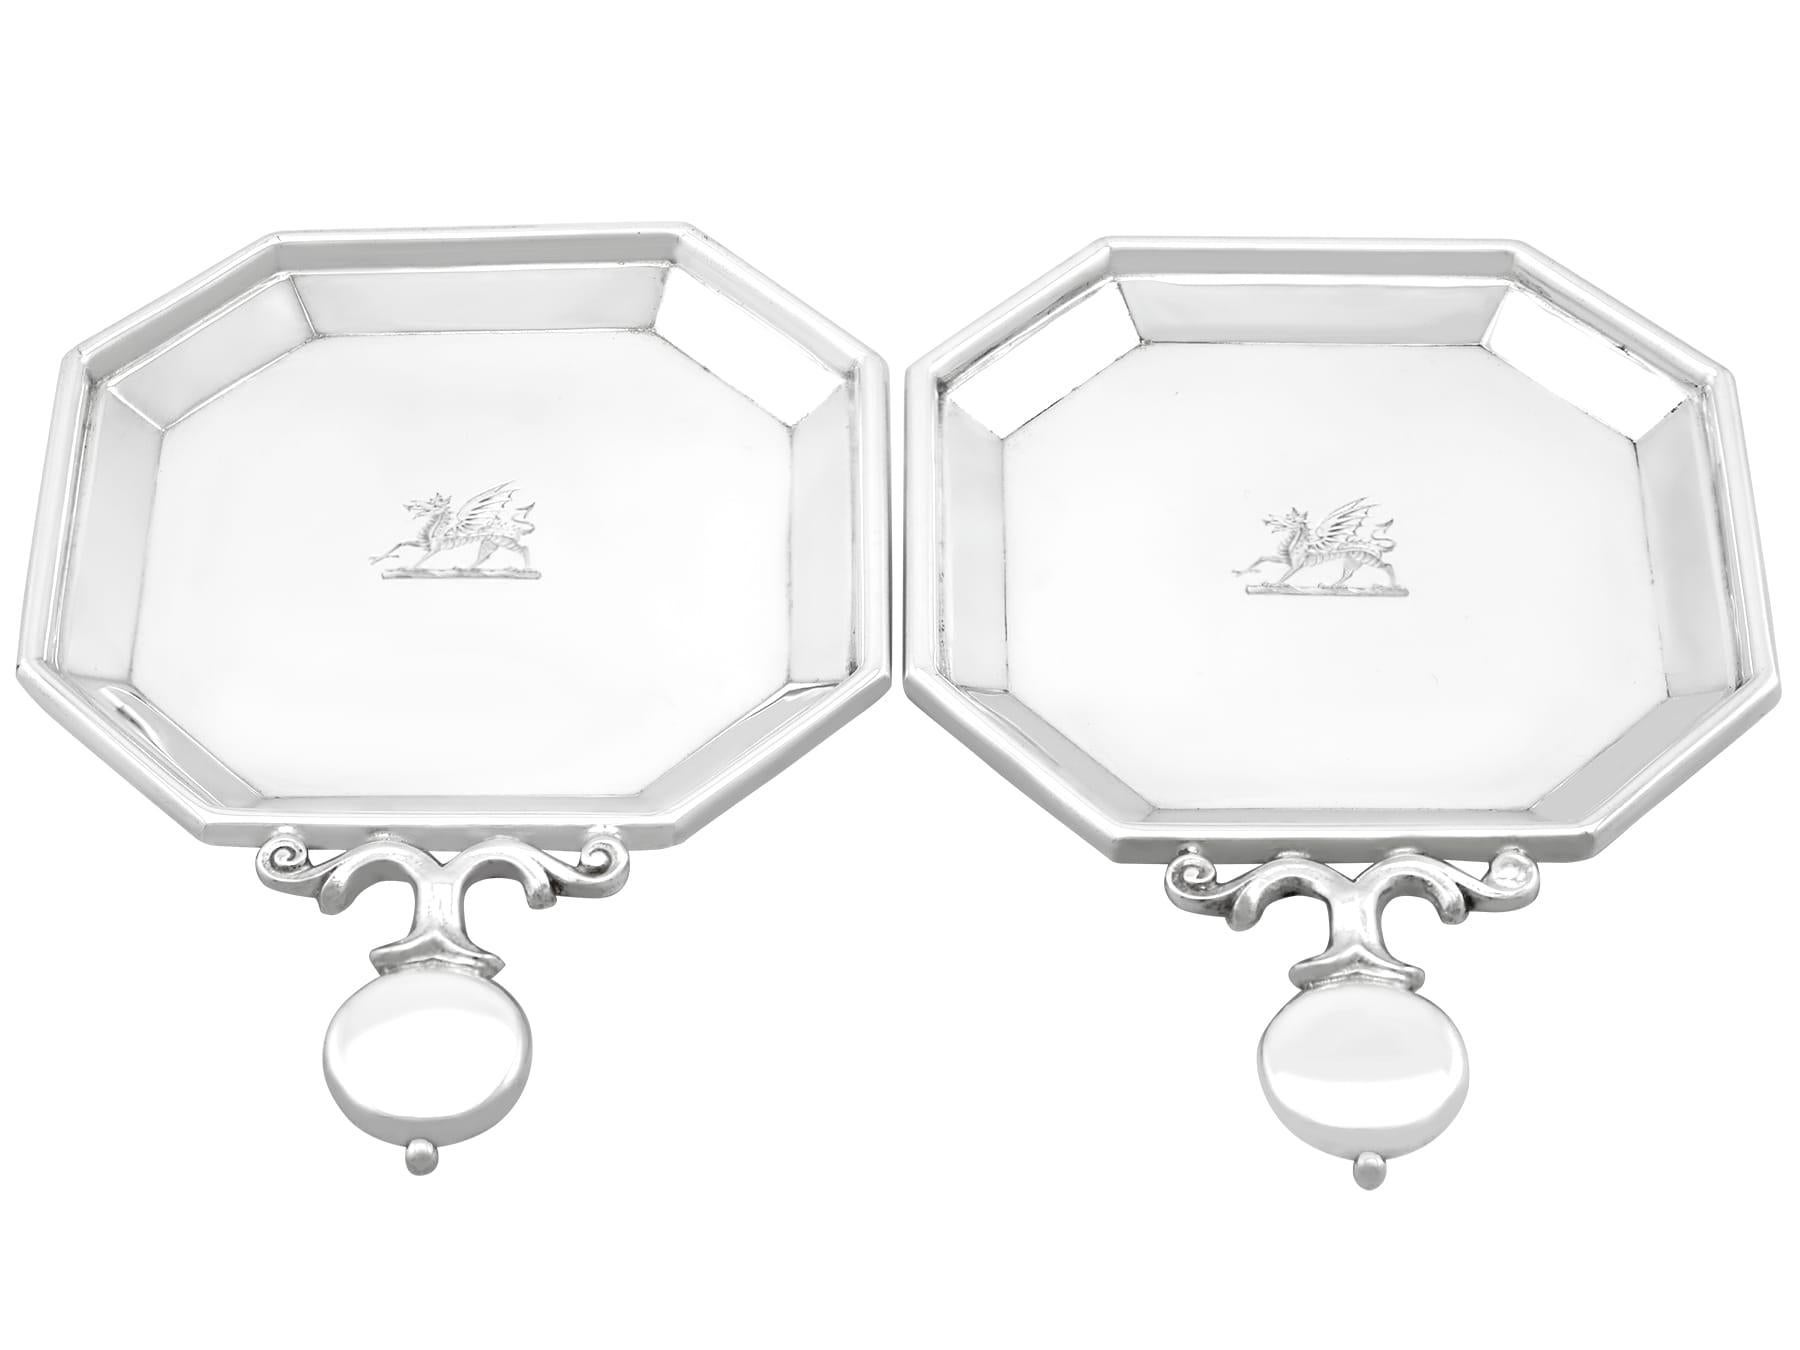 An exceptional, fine and impressive pair of antique Edward VIII sterling silver serving waiters - boxed; an addition to our silver tray, salver and platter collection

These exceptional antique Edward VIII sterling silver serving waiters have a